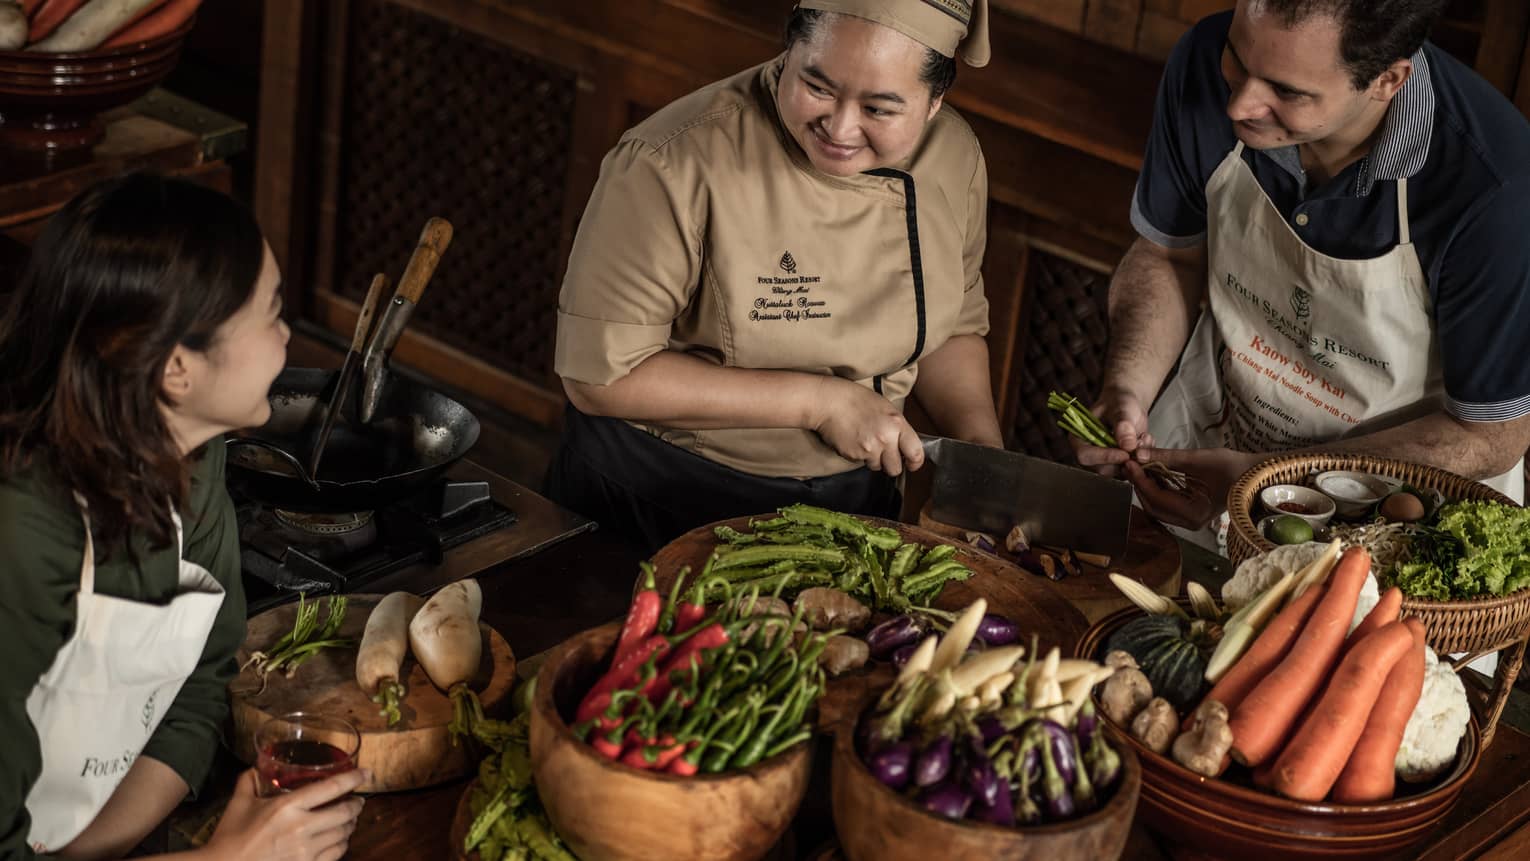 Chef chops mushrooms in front of couple, bamboo baskets with vegetables